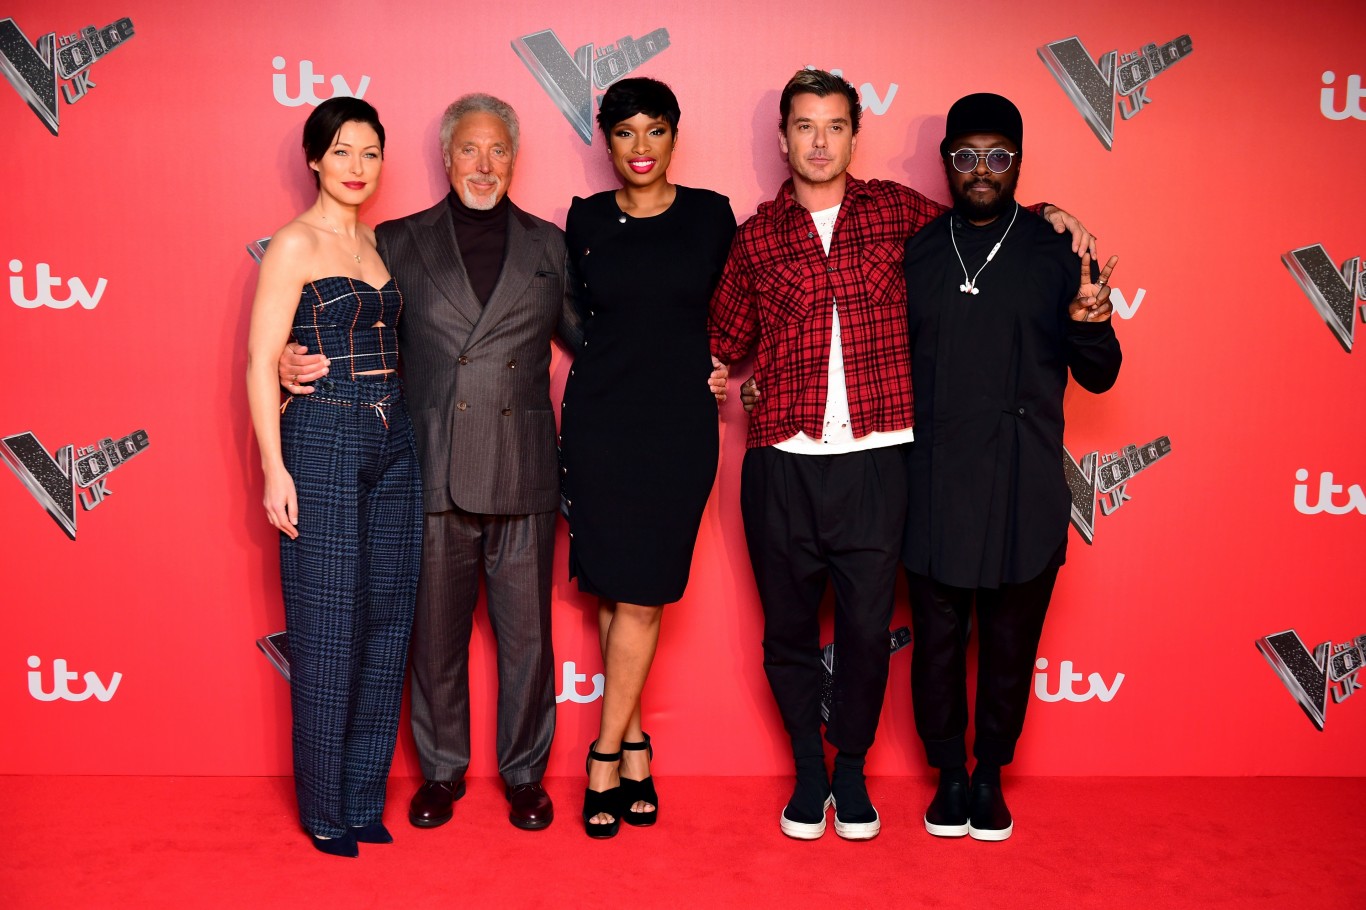 The Voice UK turns out to be more popular than Let It Shine - again